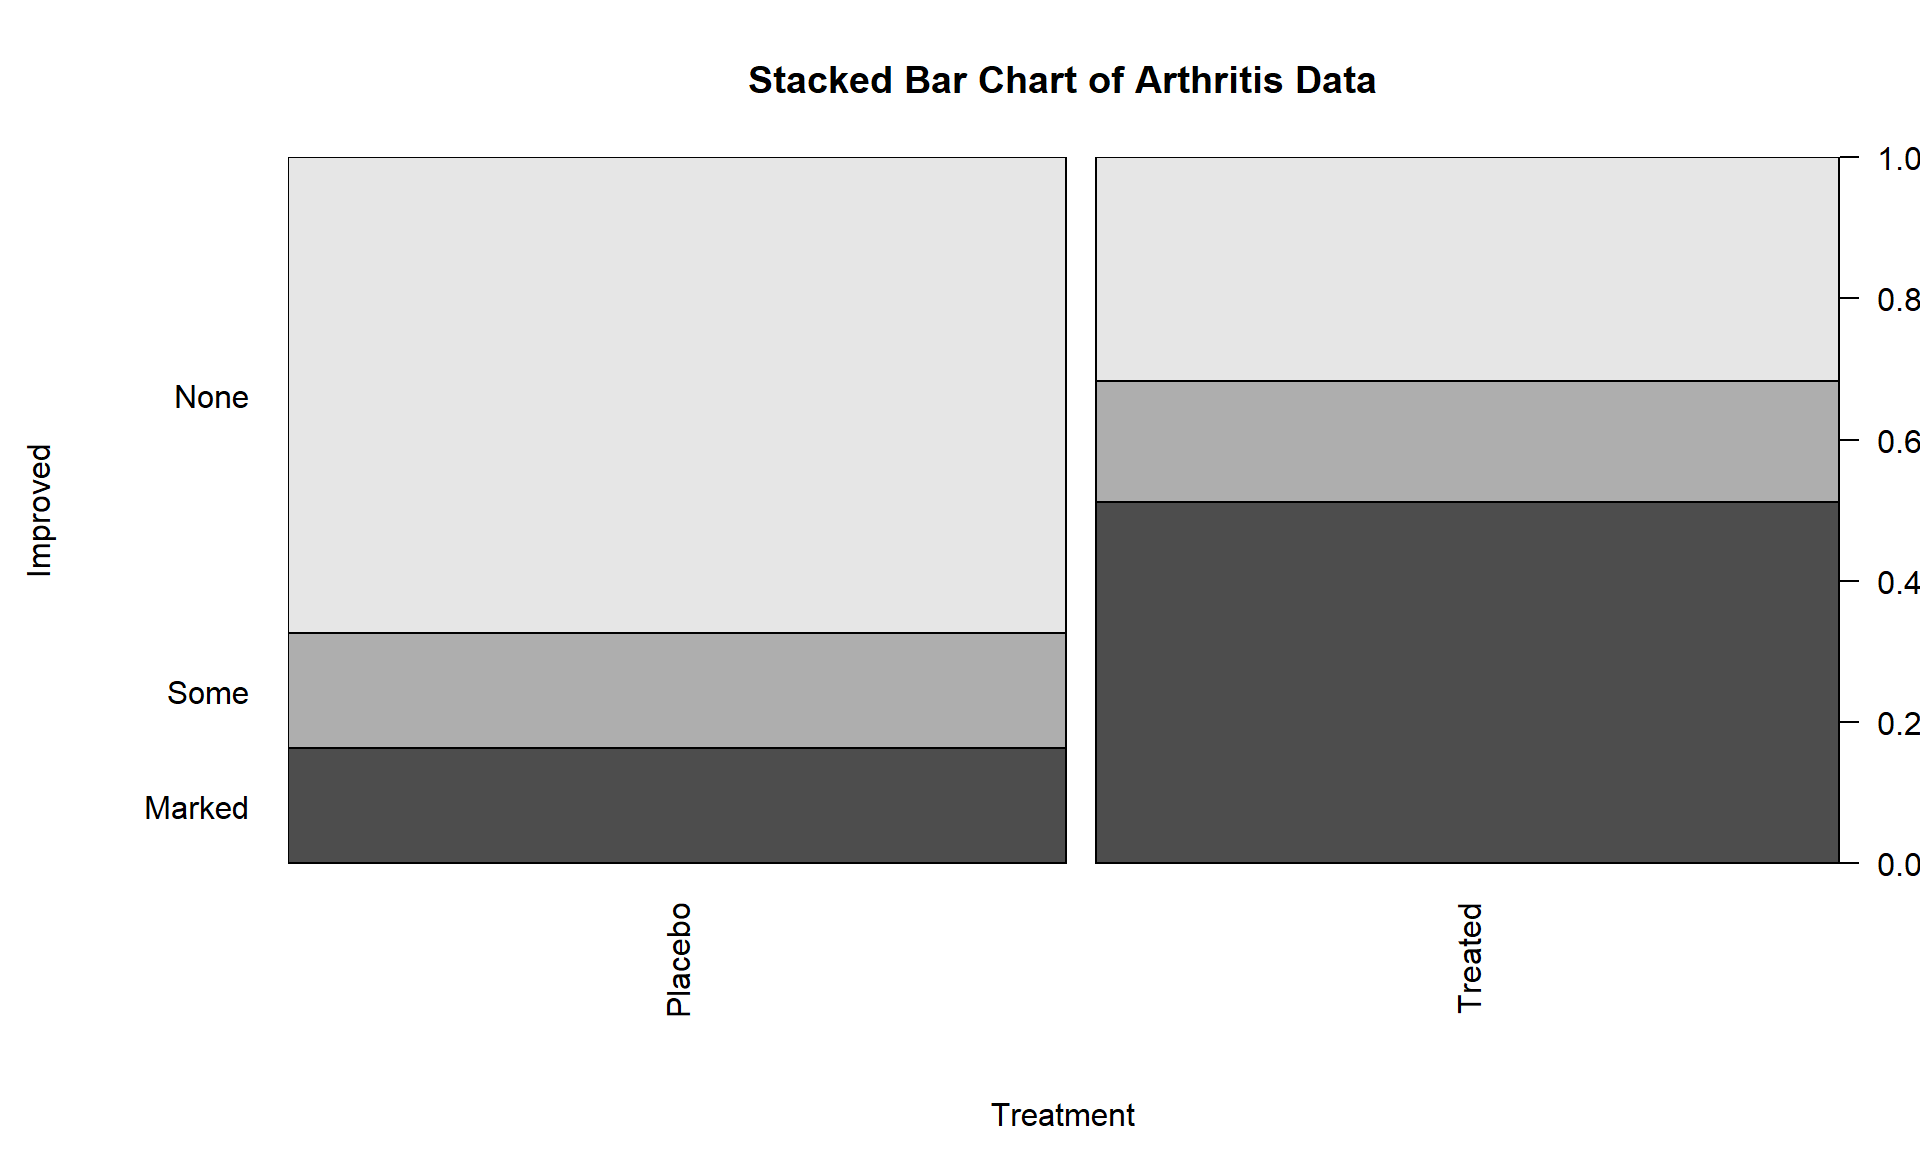 Stacked bar chart of Arthritis data. The left bar is for the Placebo group and the right bar is for the Treated group. The width of the bars is based on relative size of each group and the portion of the total height of each shaded area is the proportion of that group in each category. The lightest shading is for “none”, medium shading for “some”, and the darkest shading for “marked”, as labeled on the y-axis.